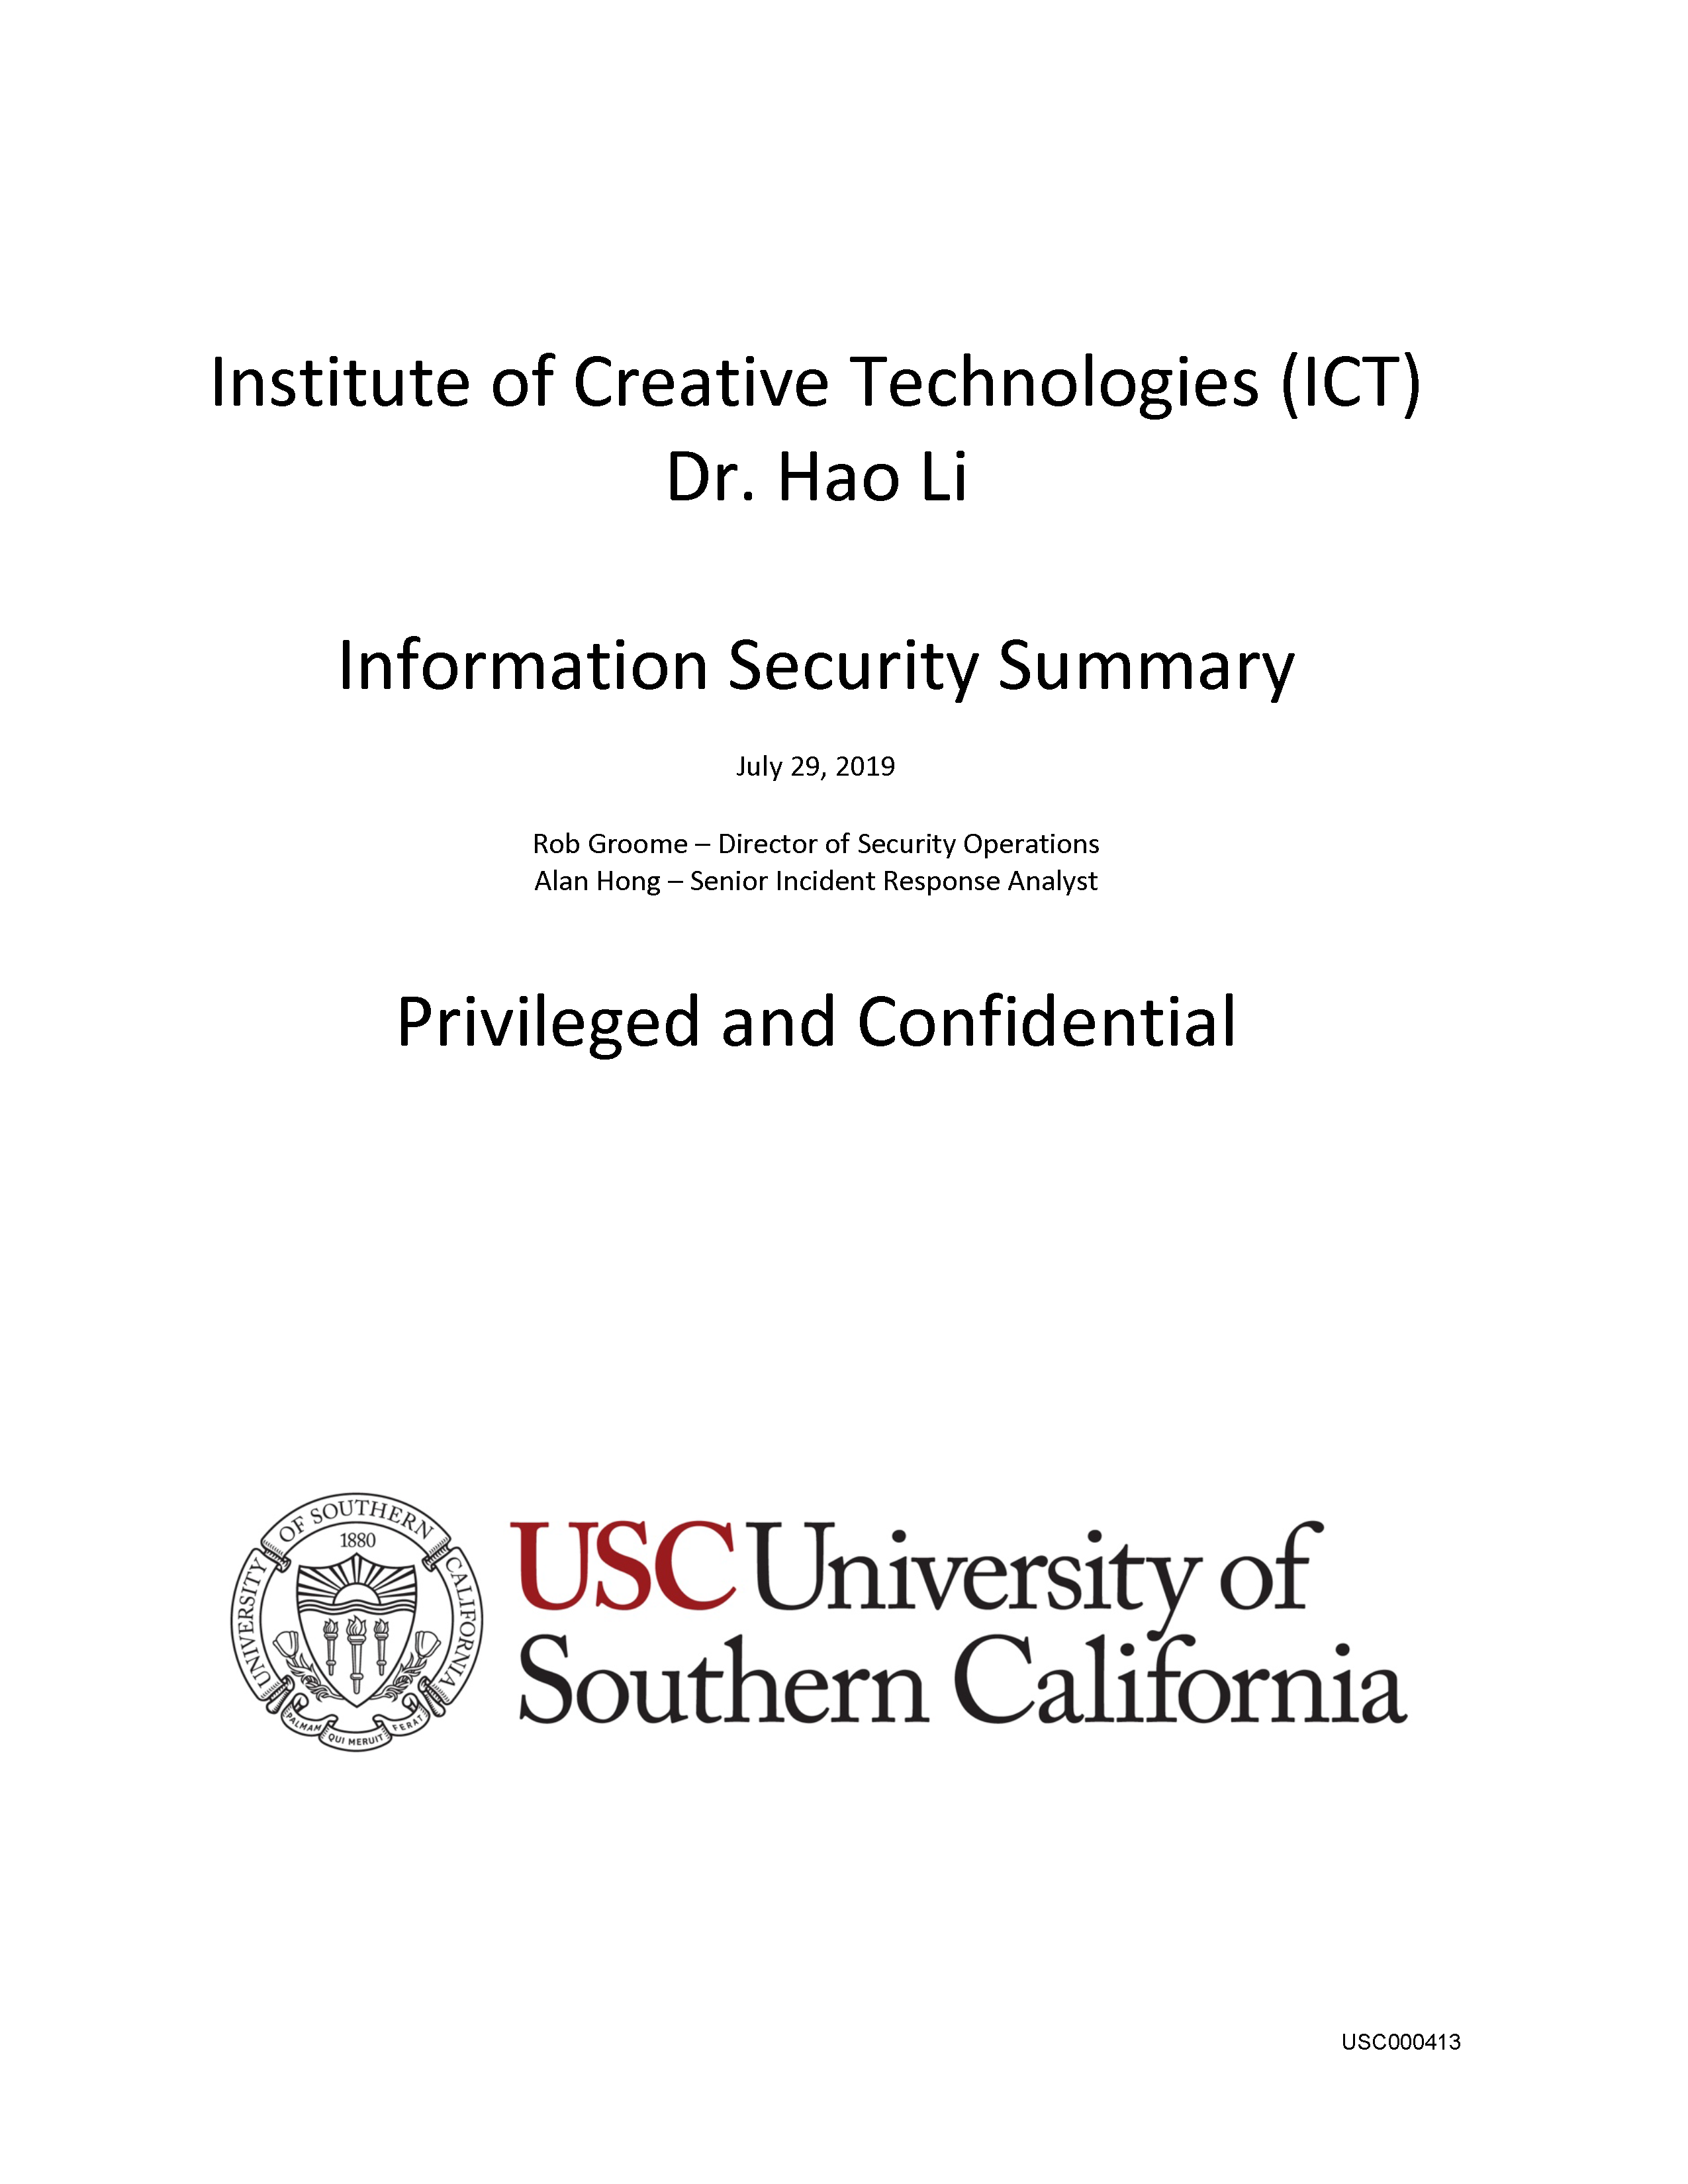 USC's Investigation Report re Hao Li's and Pinscreen's Scientific Misconduct at ACM SIGGRAPH RTL 2017 - Full Report Page 415